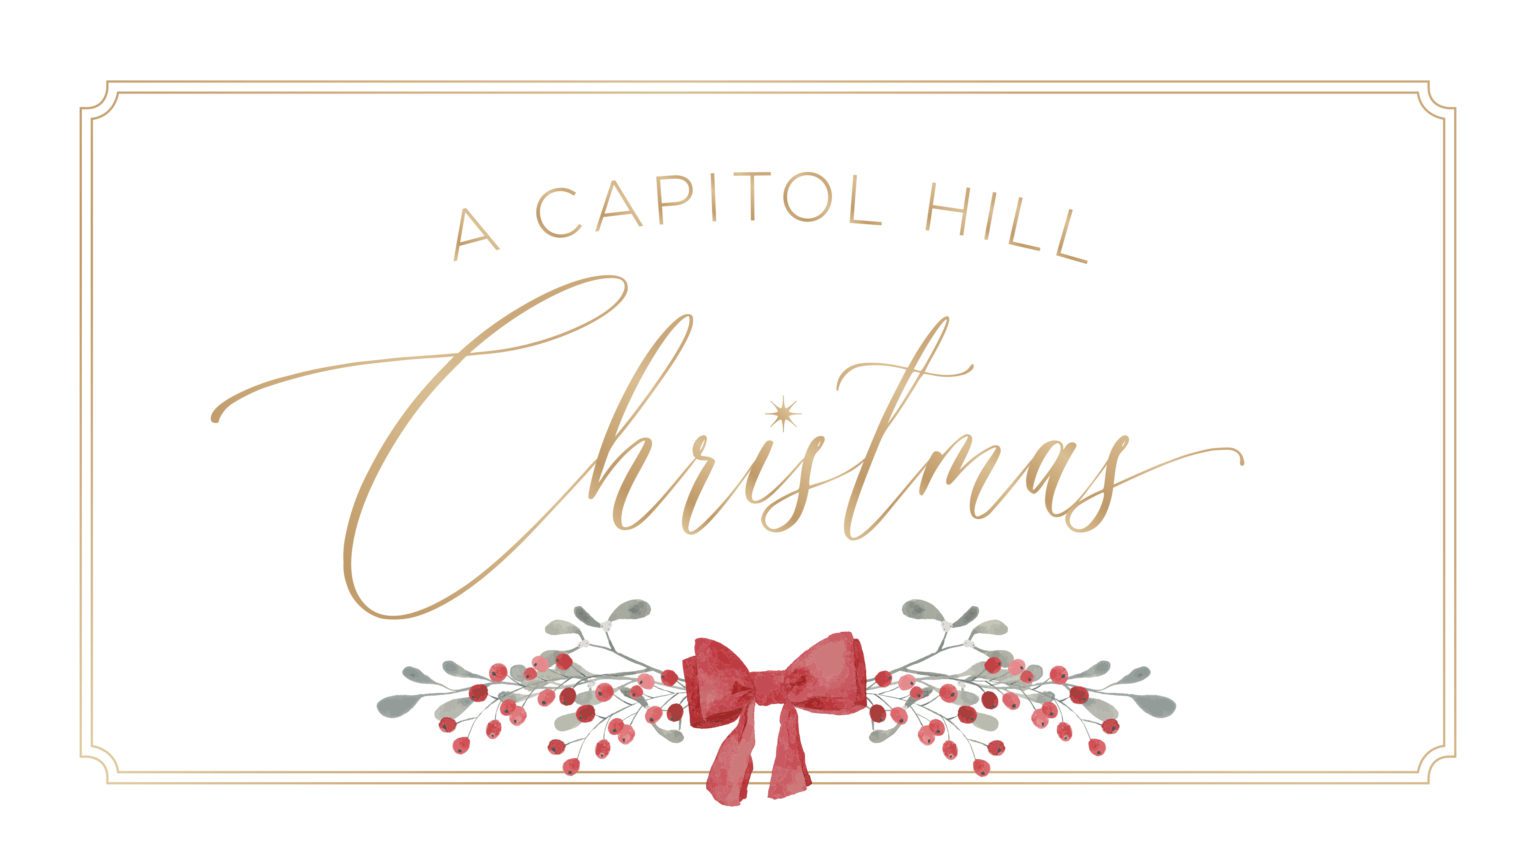 Capitol-Hill-Christmas-16x9